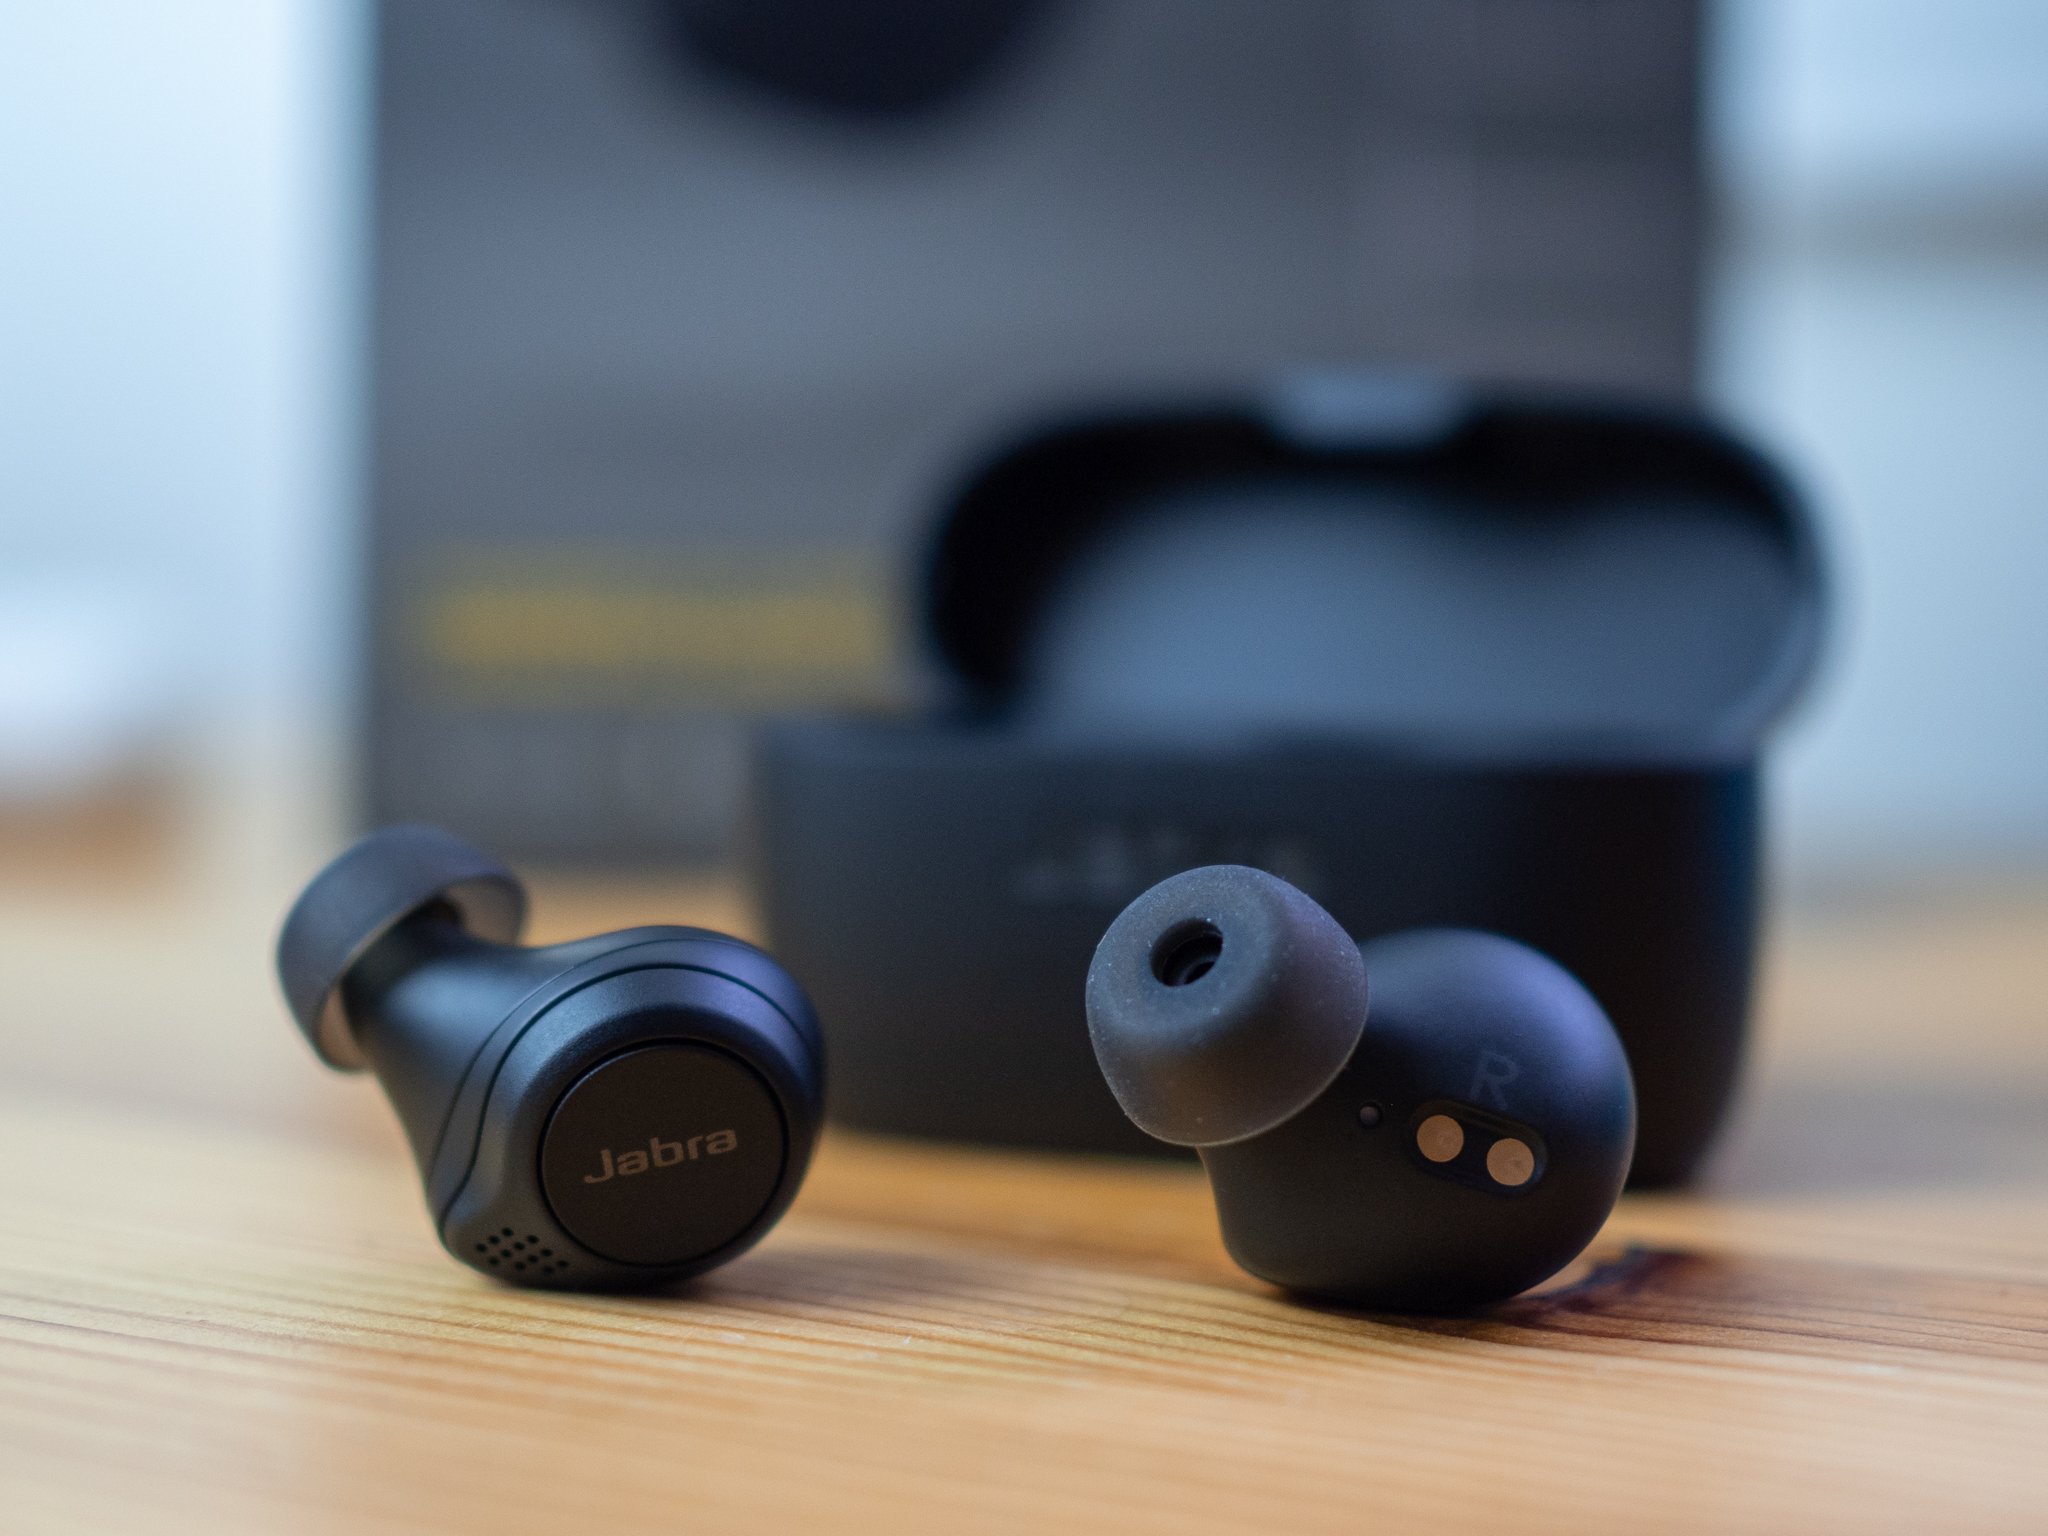 The Jabra Elite 75t true wireless earbuds sound fantastic and are